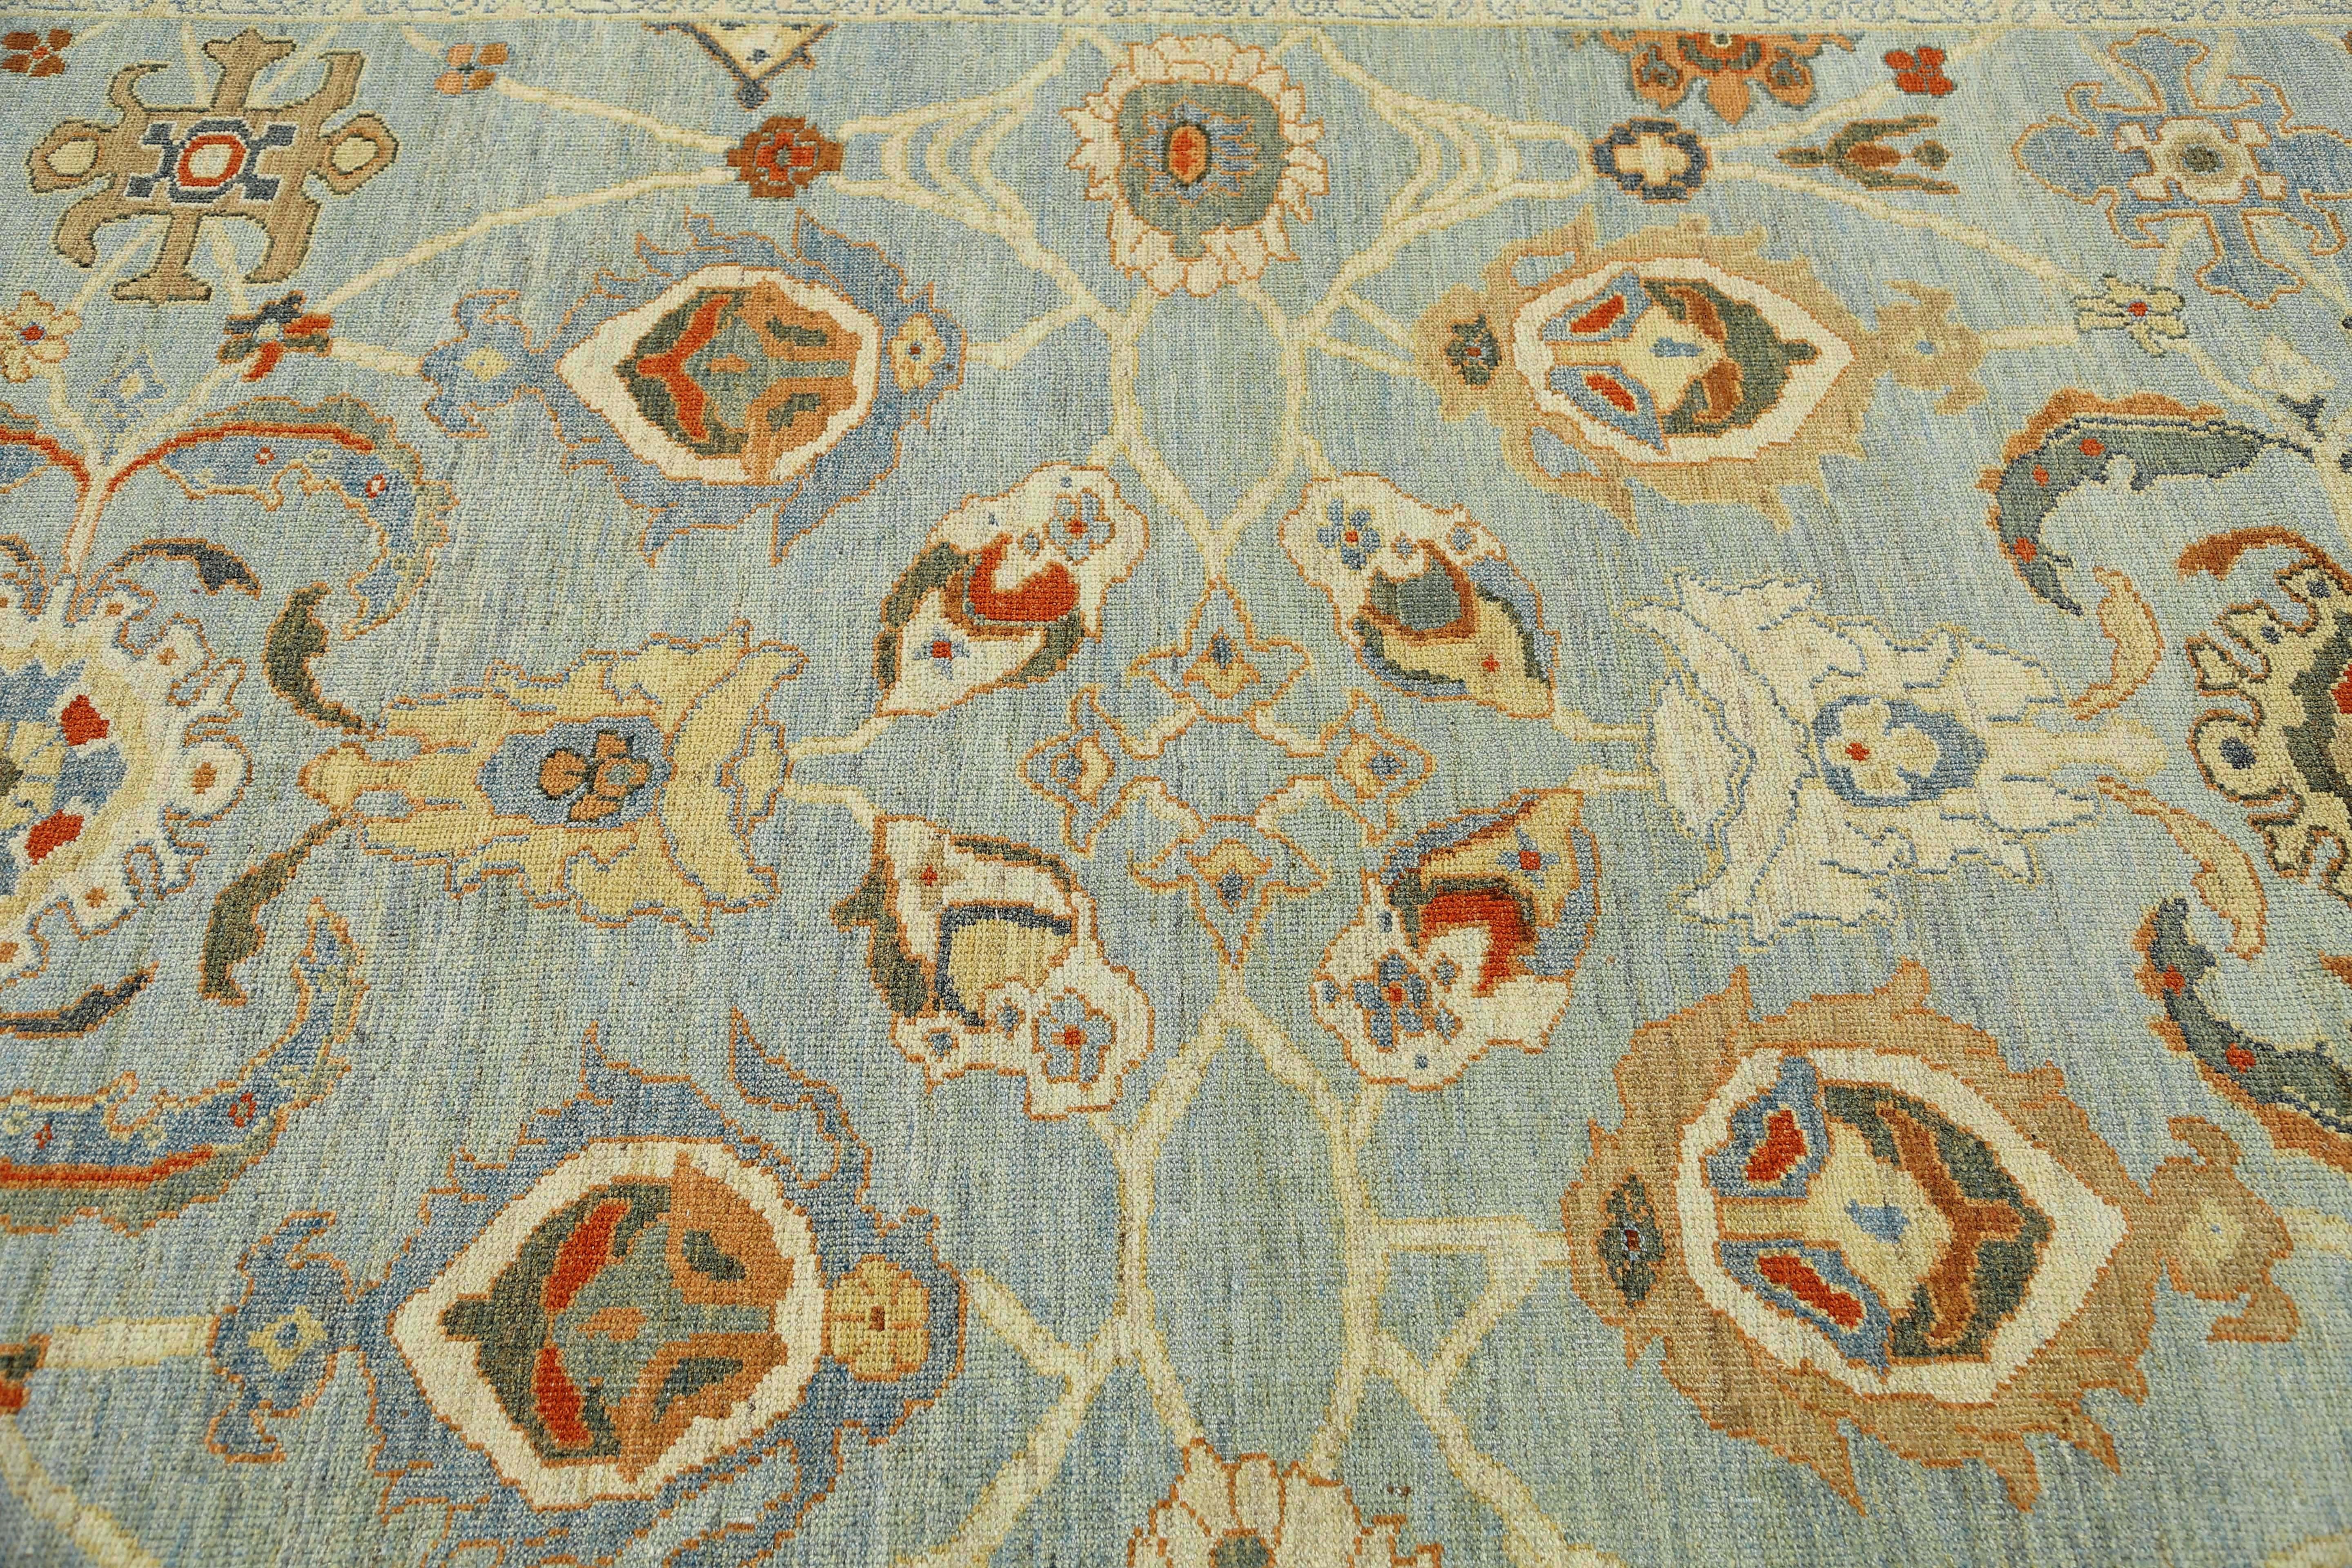 Introducing our stunning handmade Turkish Sultanabad rug with a light blue background and intricate color combination and design. Measuring 8'2'' by 10'2'', this rug is the perfect addition to elevate any space. The intricate design is carefully